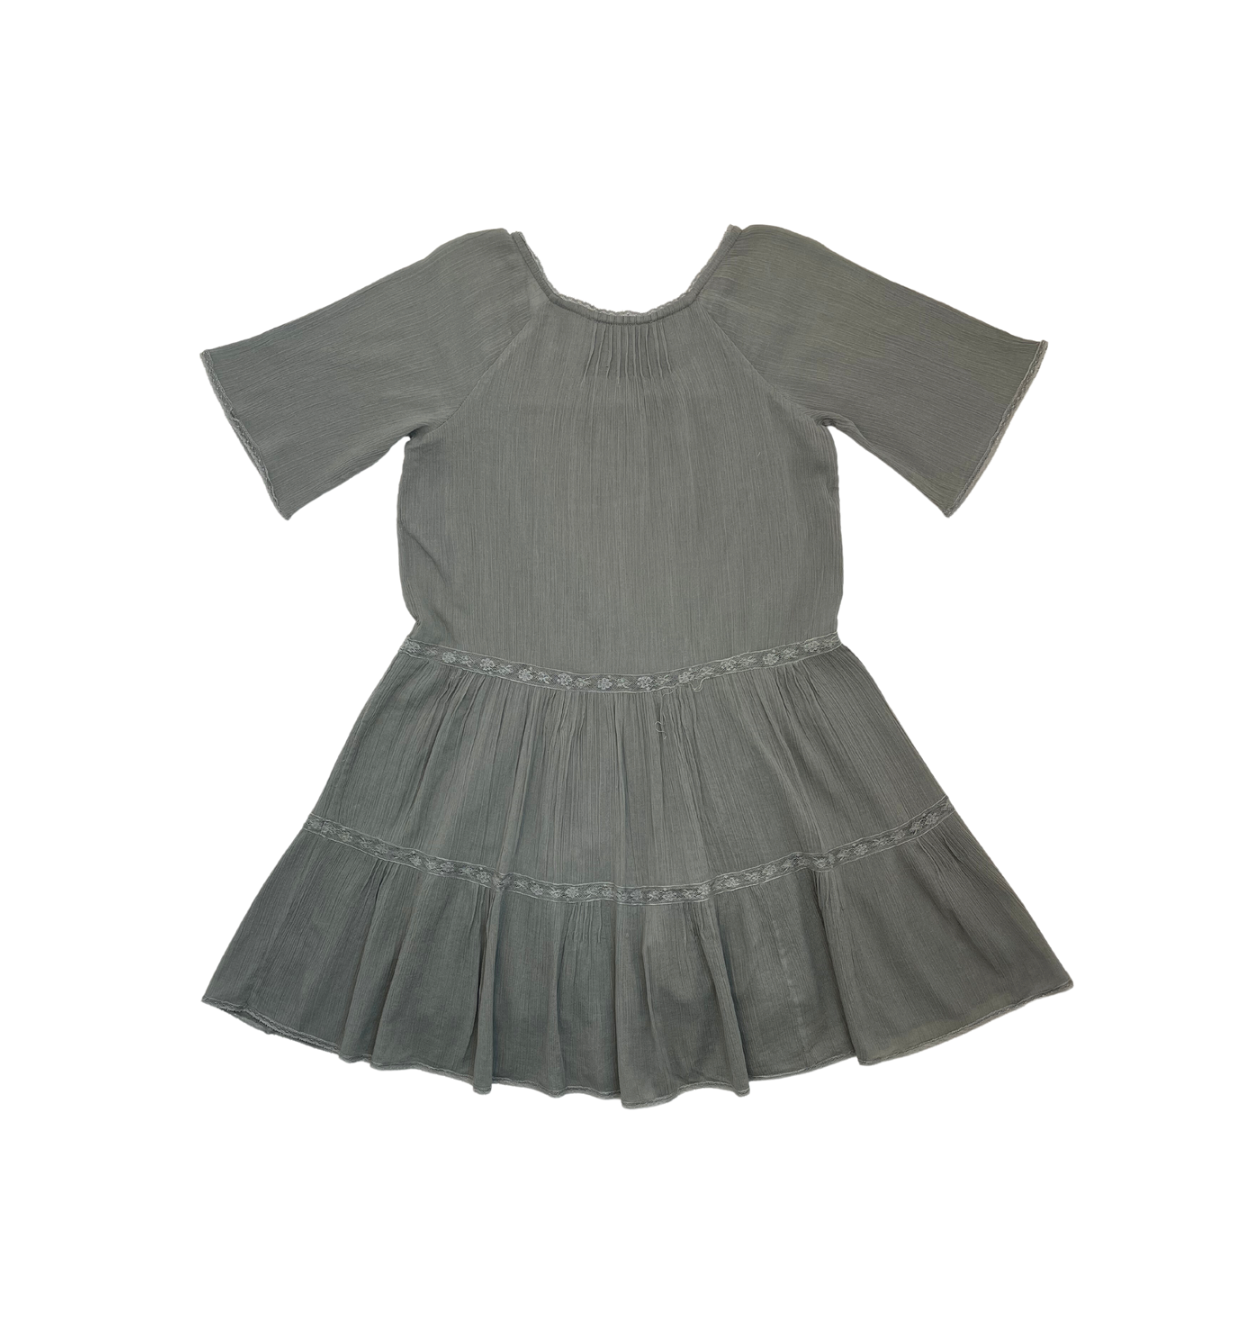 BONPOINT - Gray dress - 6 years old